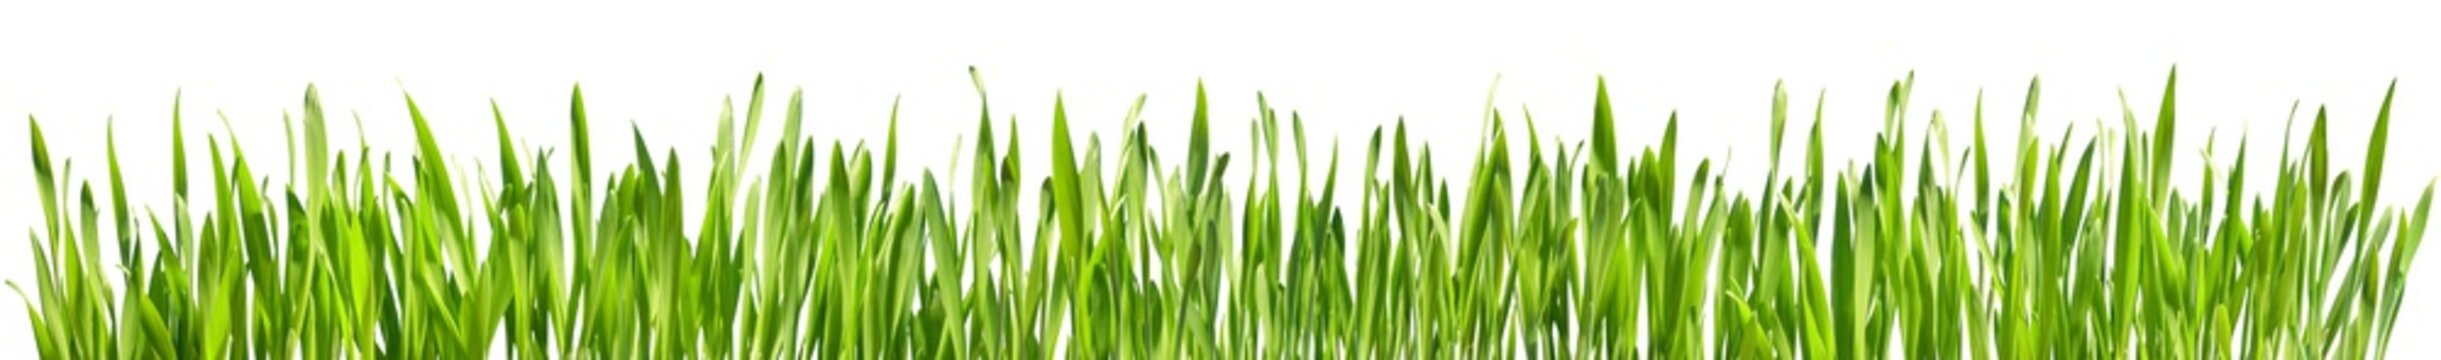 Perfect Grass Isolated - Spring Border
